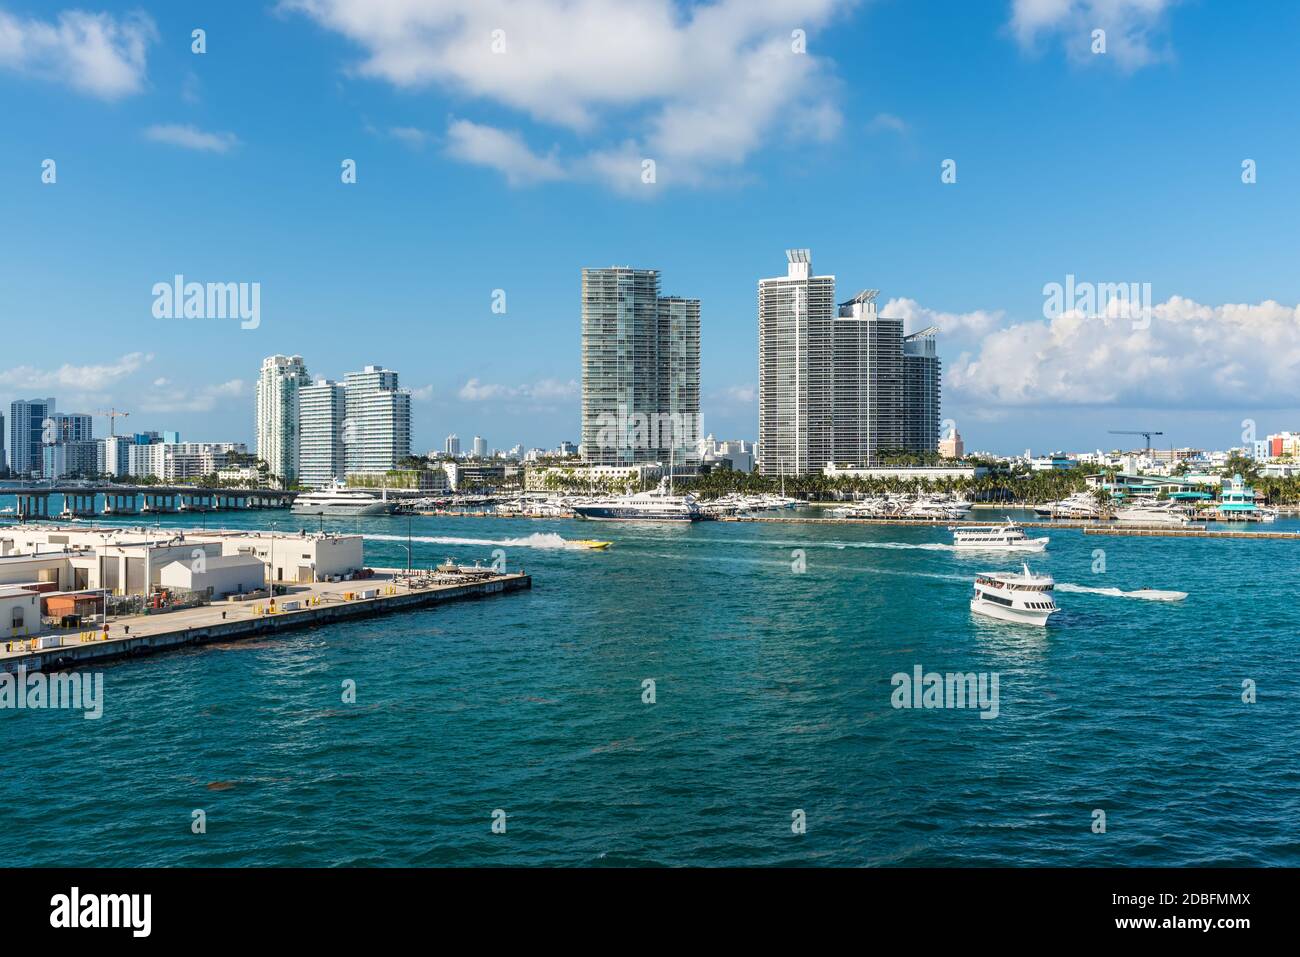 Miami, FL, United States - April 28, 2019: Luxury high-rise condominiums overlooking boat traffic on the Florida Intra-Coastal Waterway (Meloy Channel Stock Photo